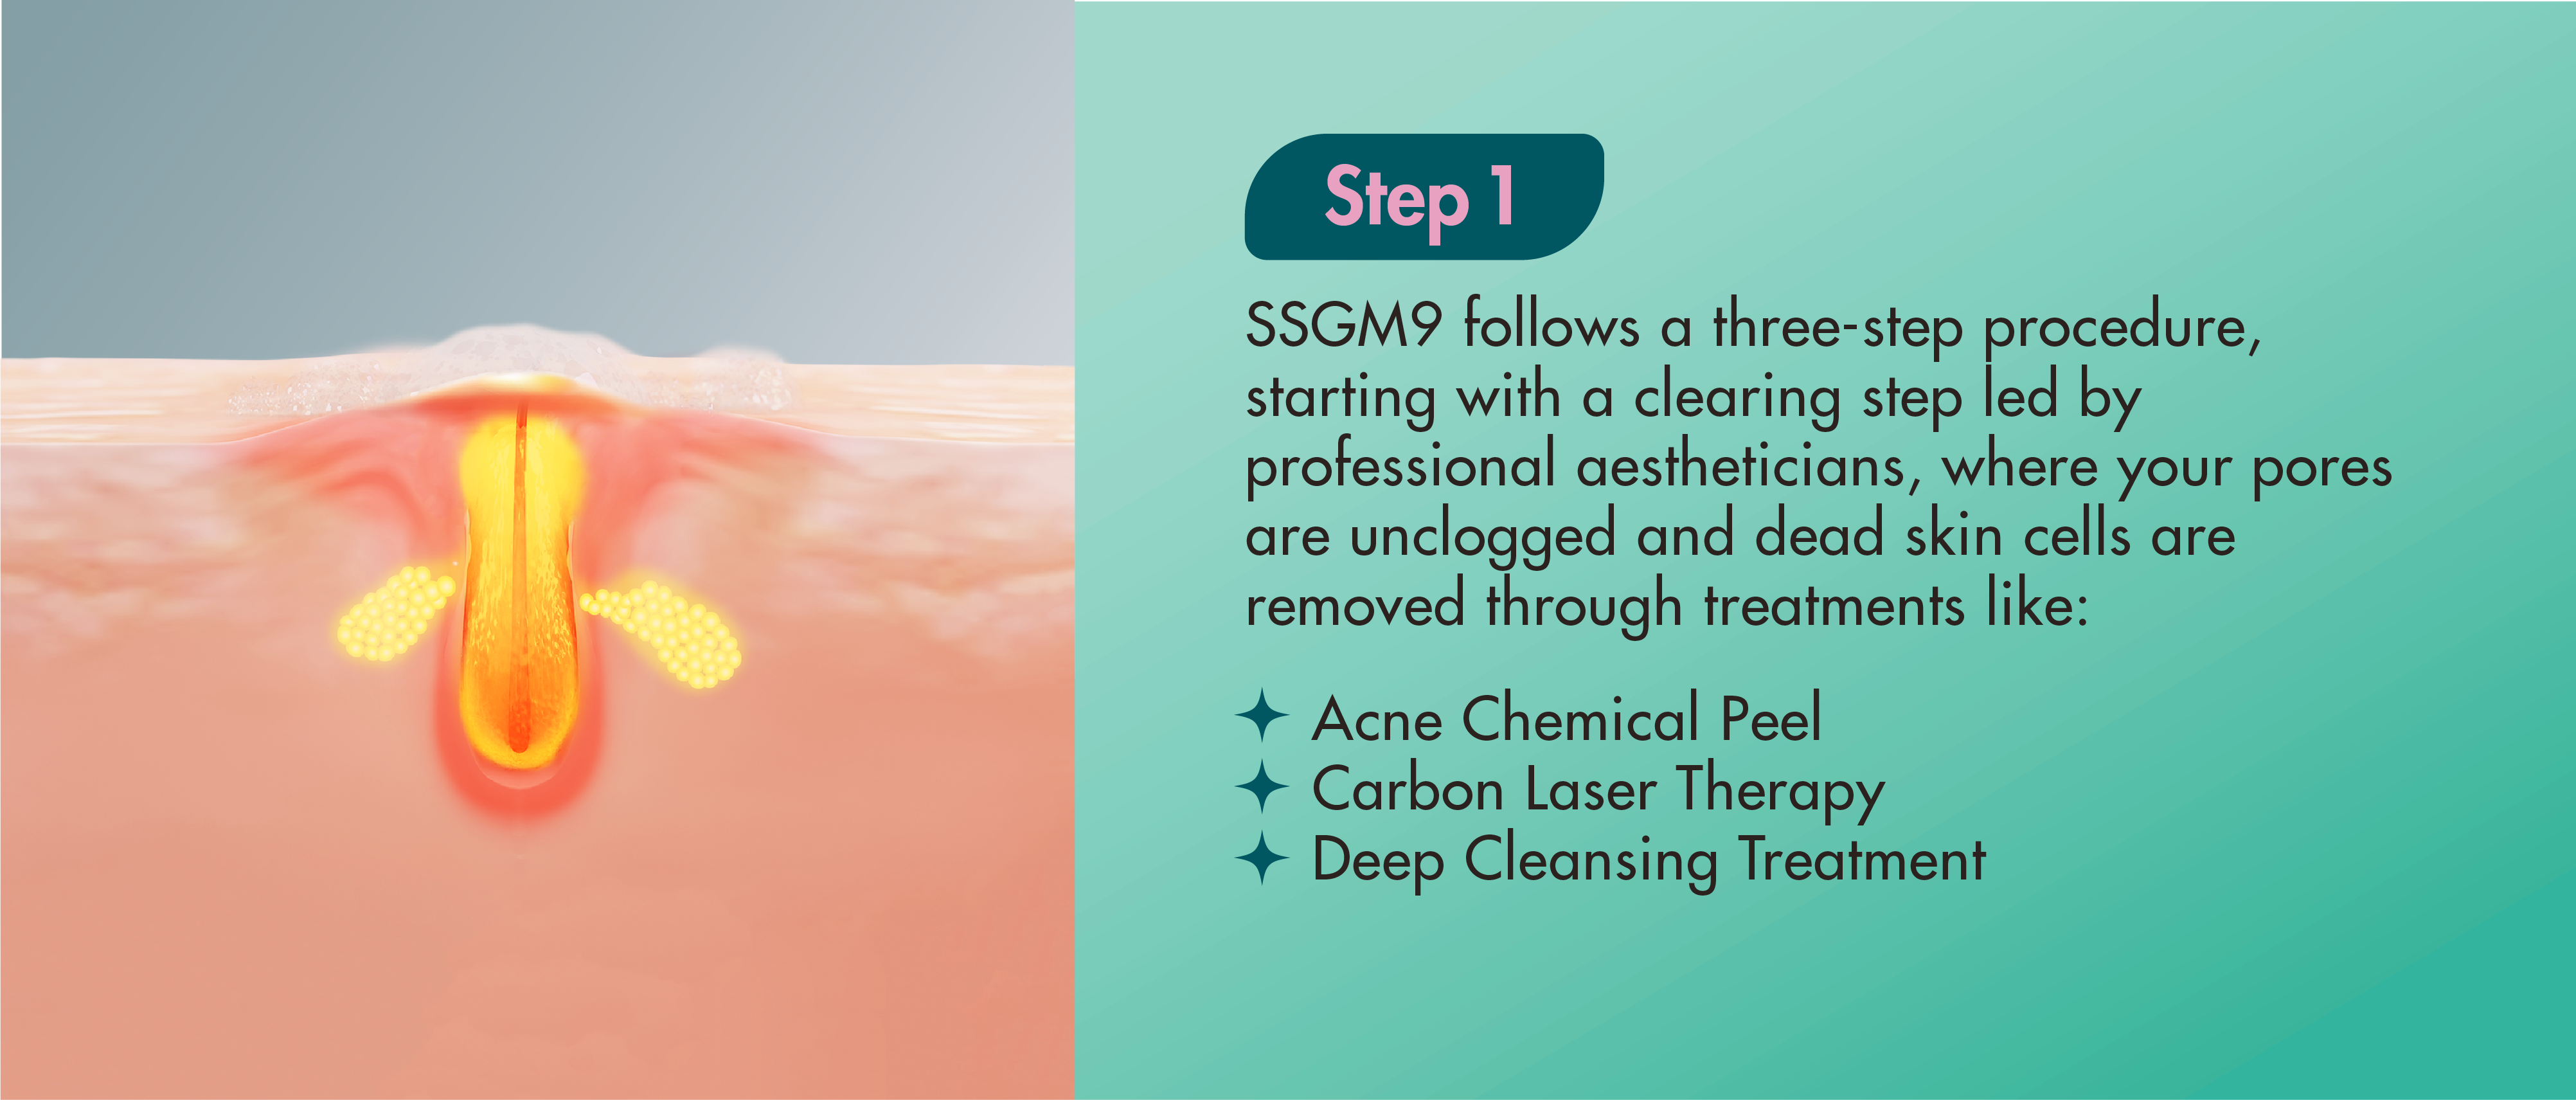 SSGM9 follows a three-step procedure, starting with a clearing step led by professional aestheticians, where your pores are unclogged and dead skin cells are removed through treatments like: Acne Chemical Peel Carbon Laser Therapy Deep Cleansing Treatment